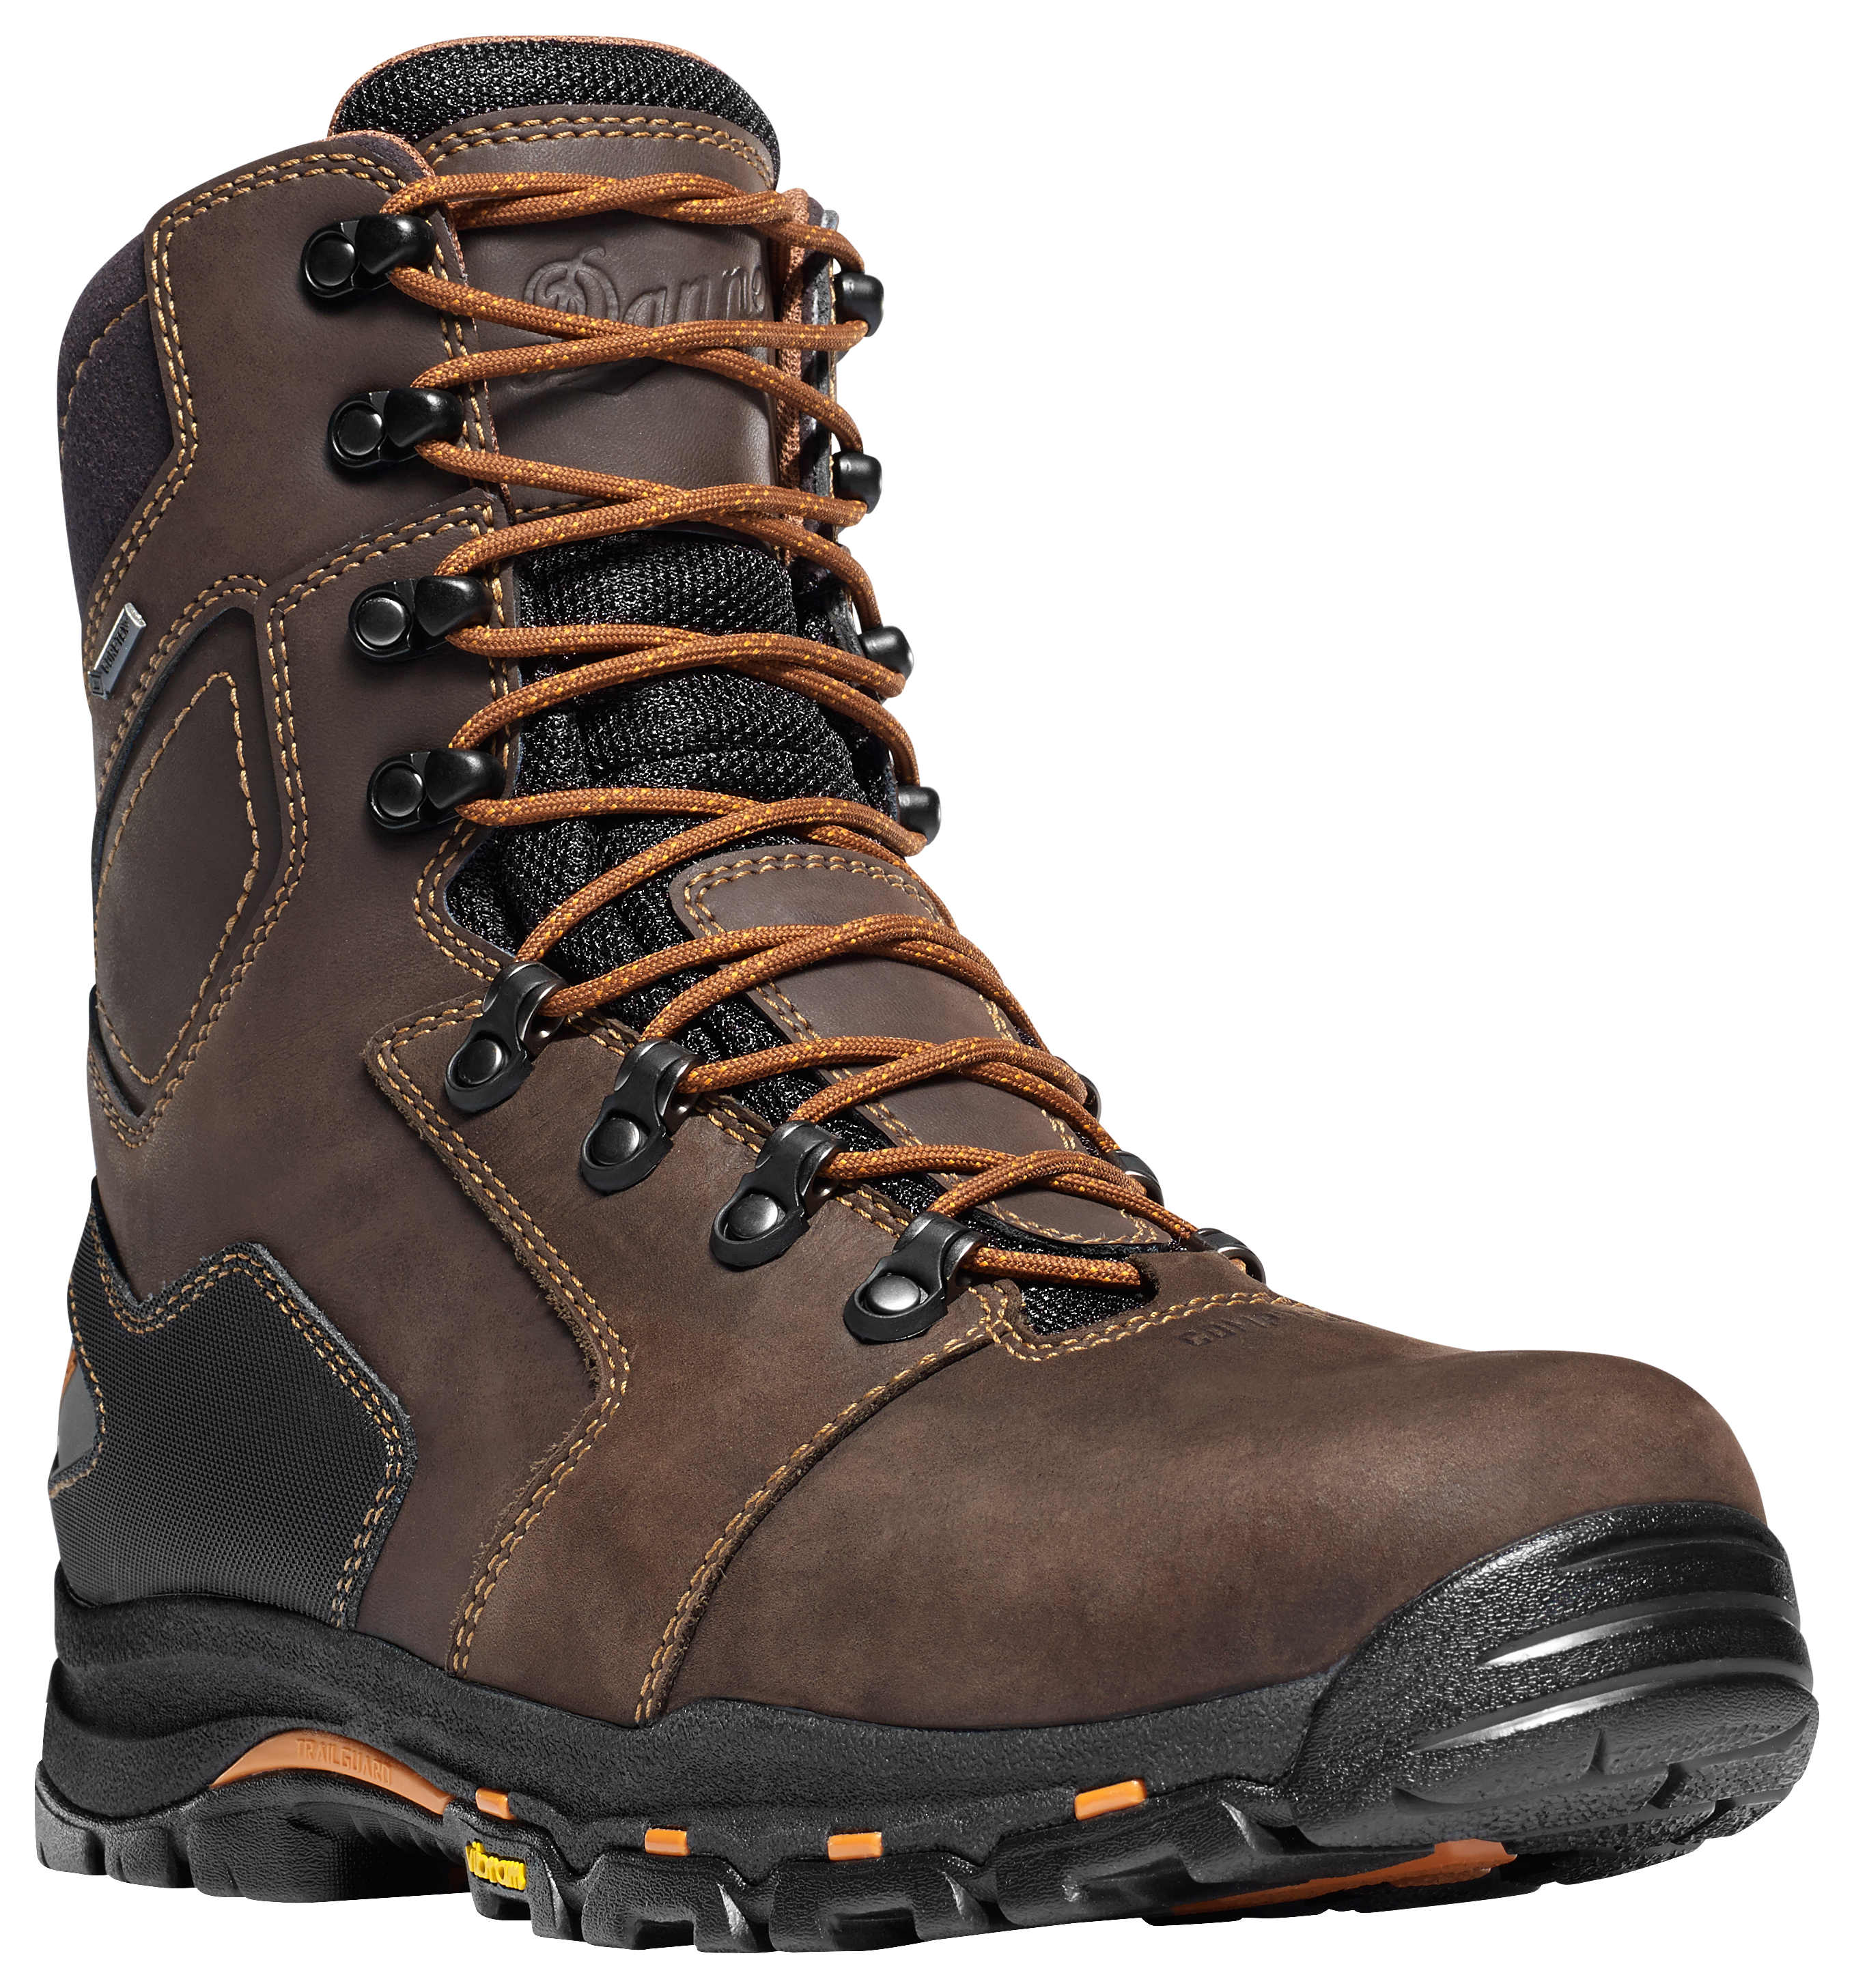 Danner Vicious GORE-TEX Composite Toe Work Boots for Men - Brown - 13W